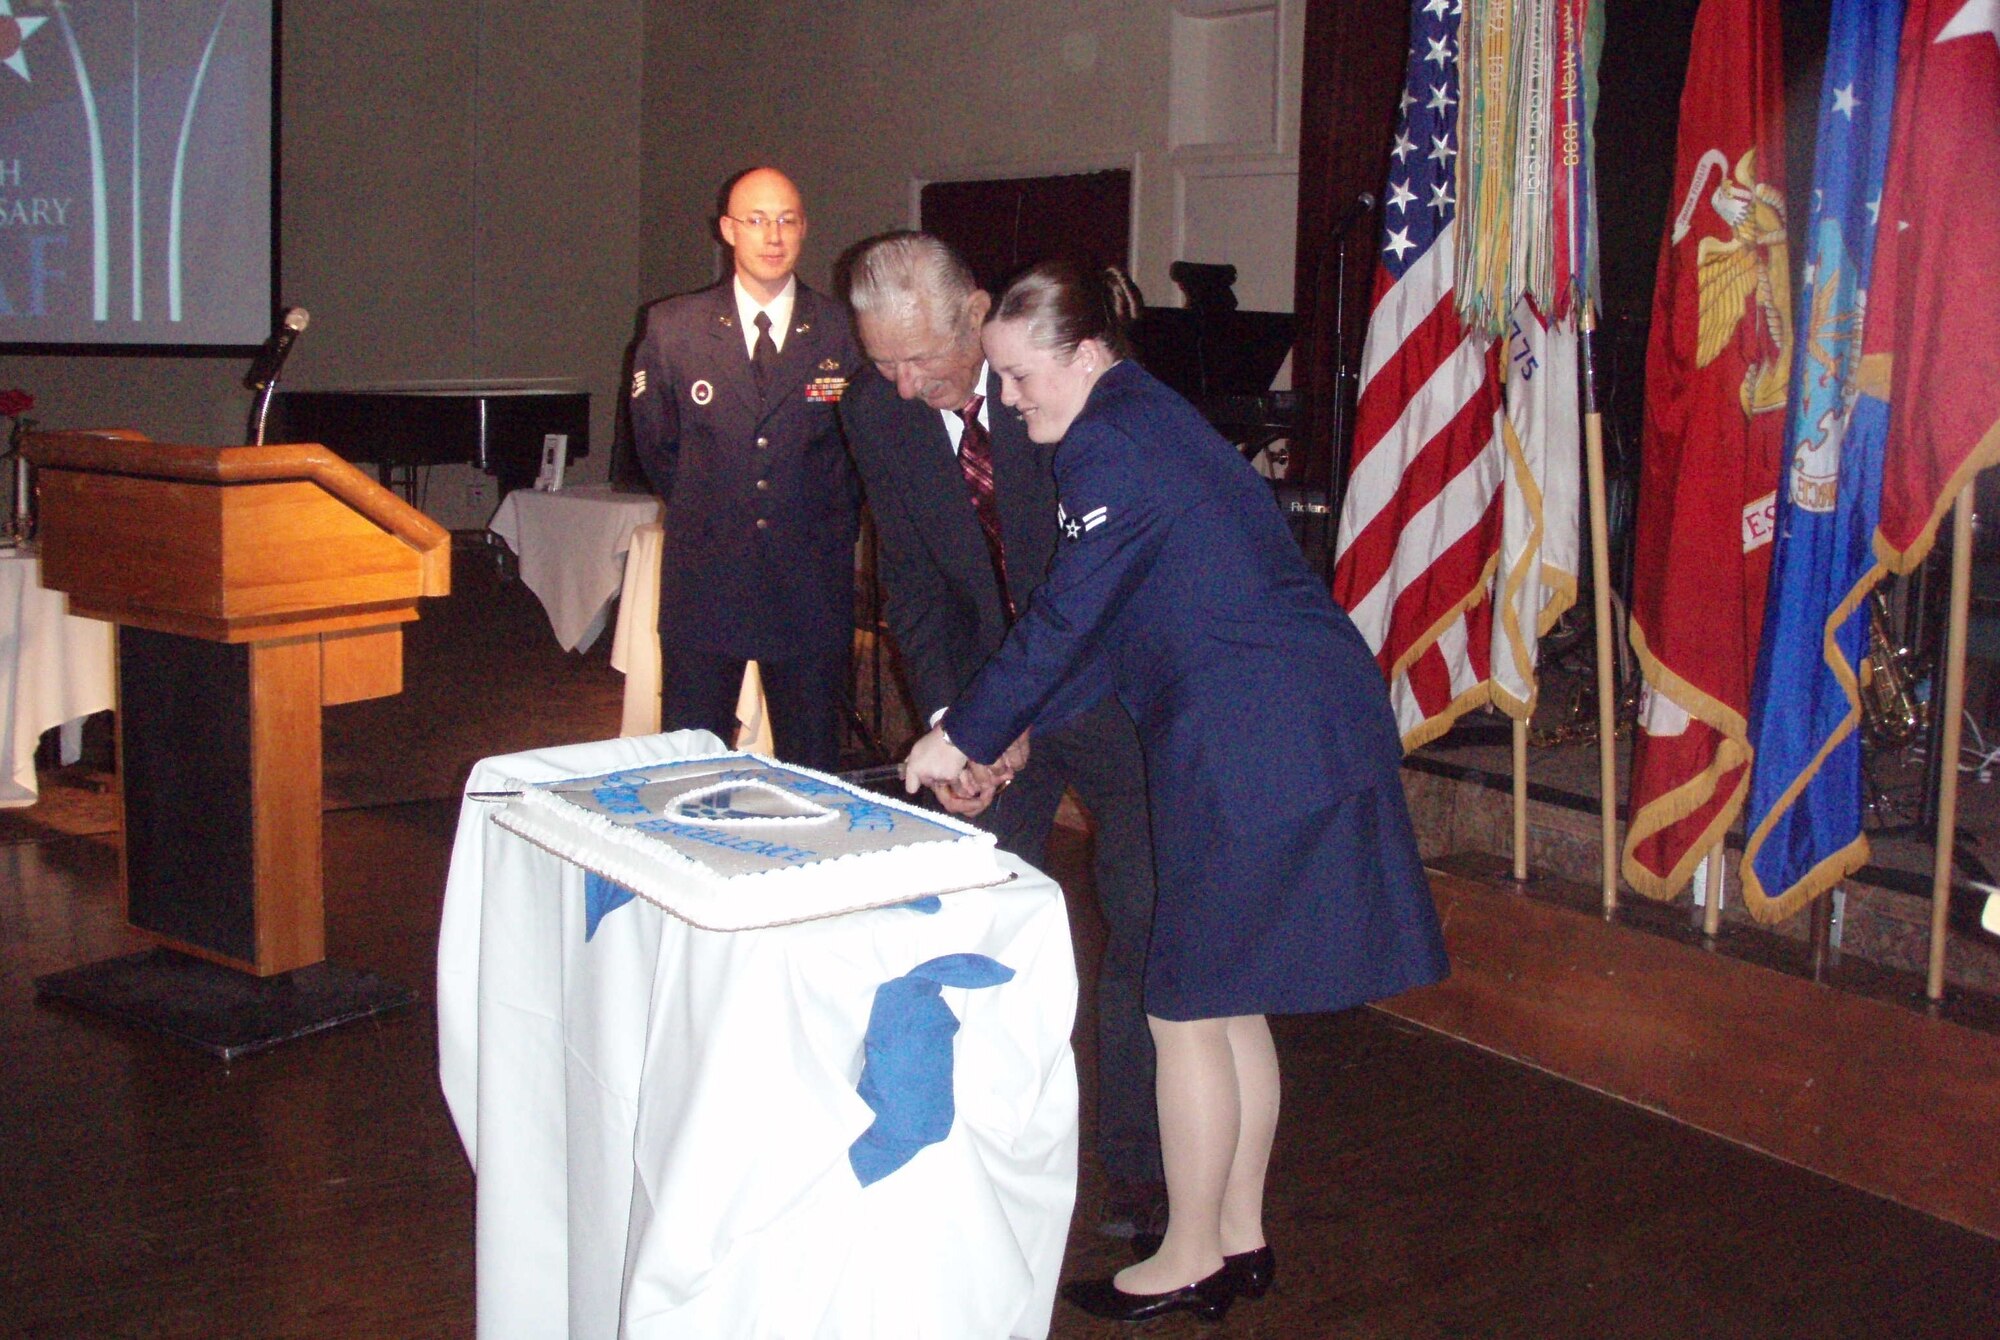 Cutting the cake at the 314th Training Squadron Air Force Ball are retired Master Sgt. Nicholas Chizewski, who enlisted in the AIr Force May 8, 1948, and Airman First Class Elizabeth Steveson, who enlisted Sept. 11, 2006. (Courtesy photo)